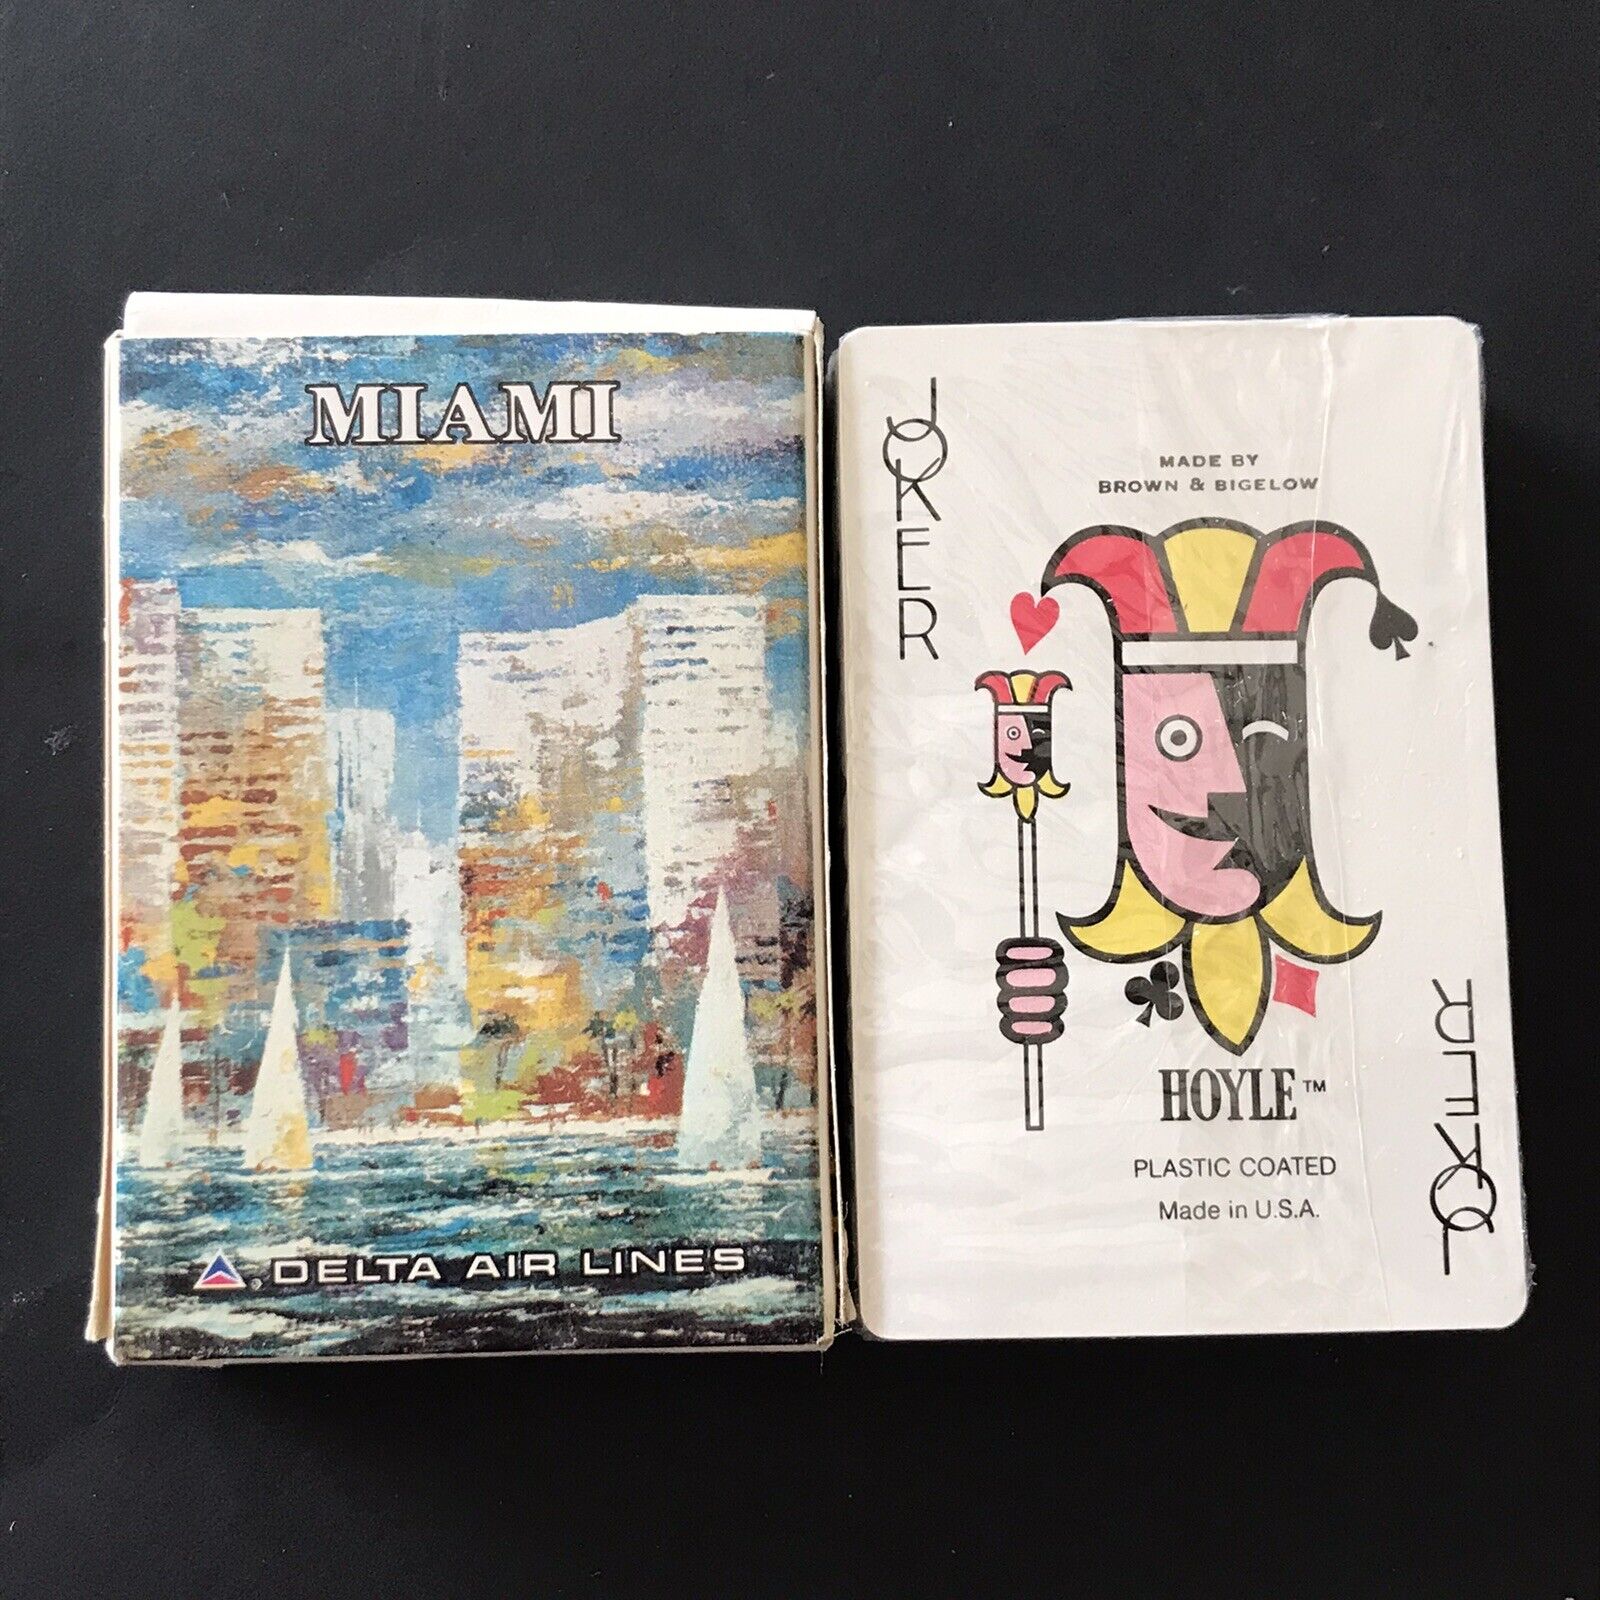 VTG Miami Florida Delta Airlines Playing Cards Hoyle NEW FACTORY SEALED Deck